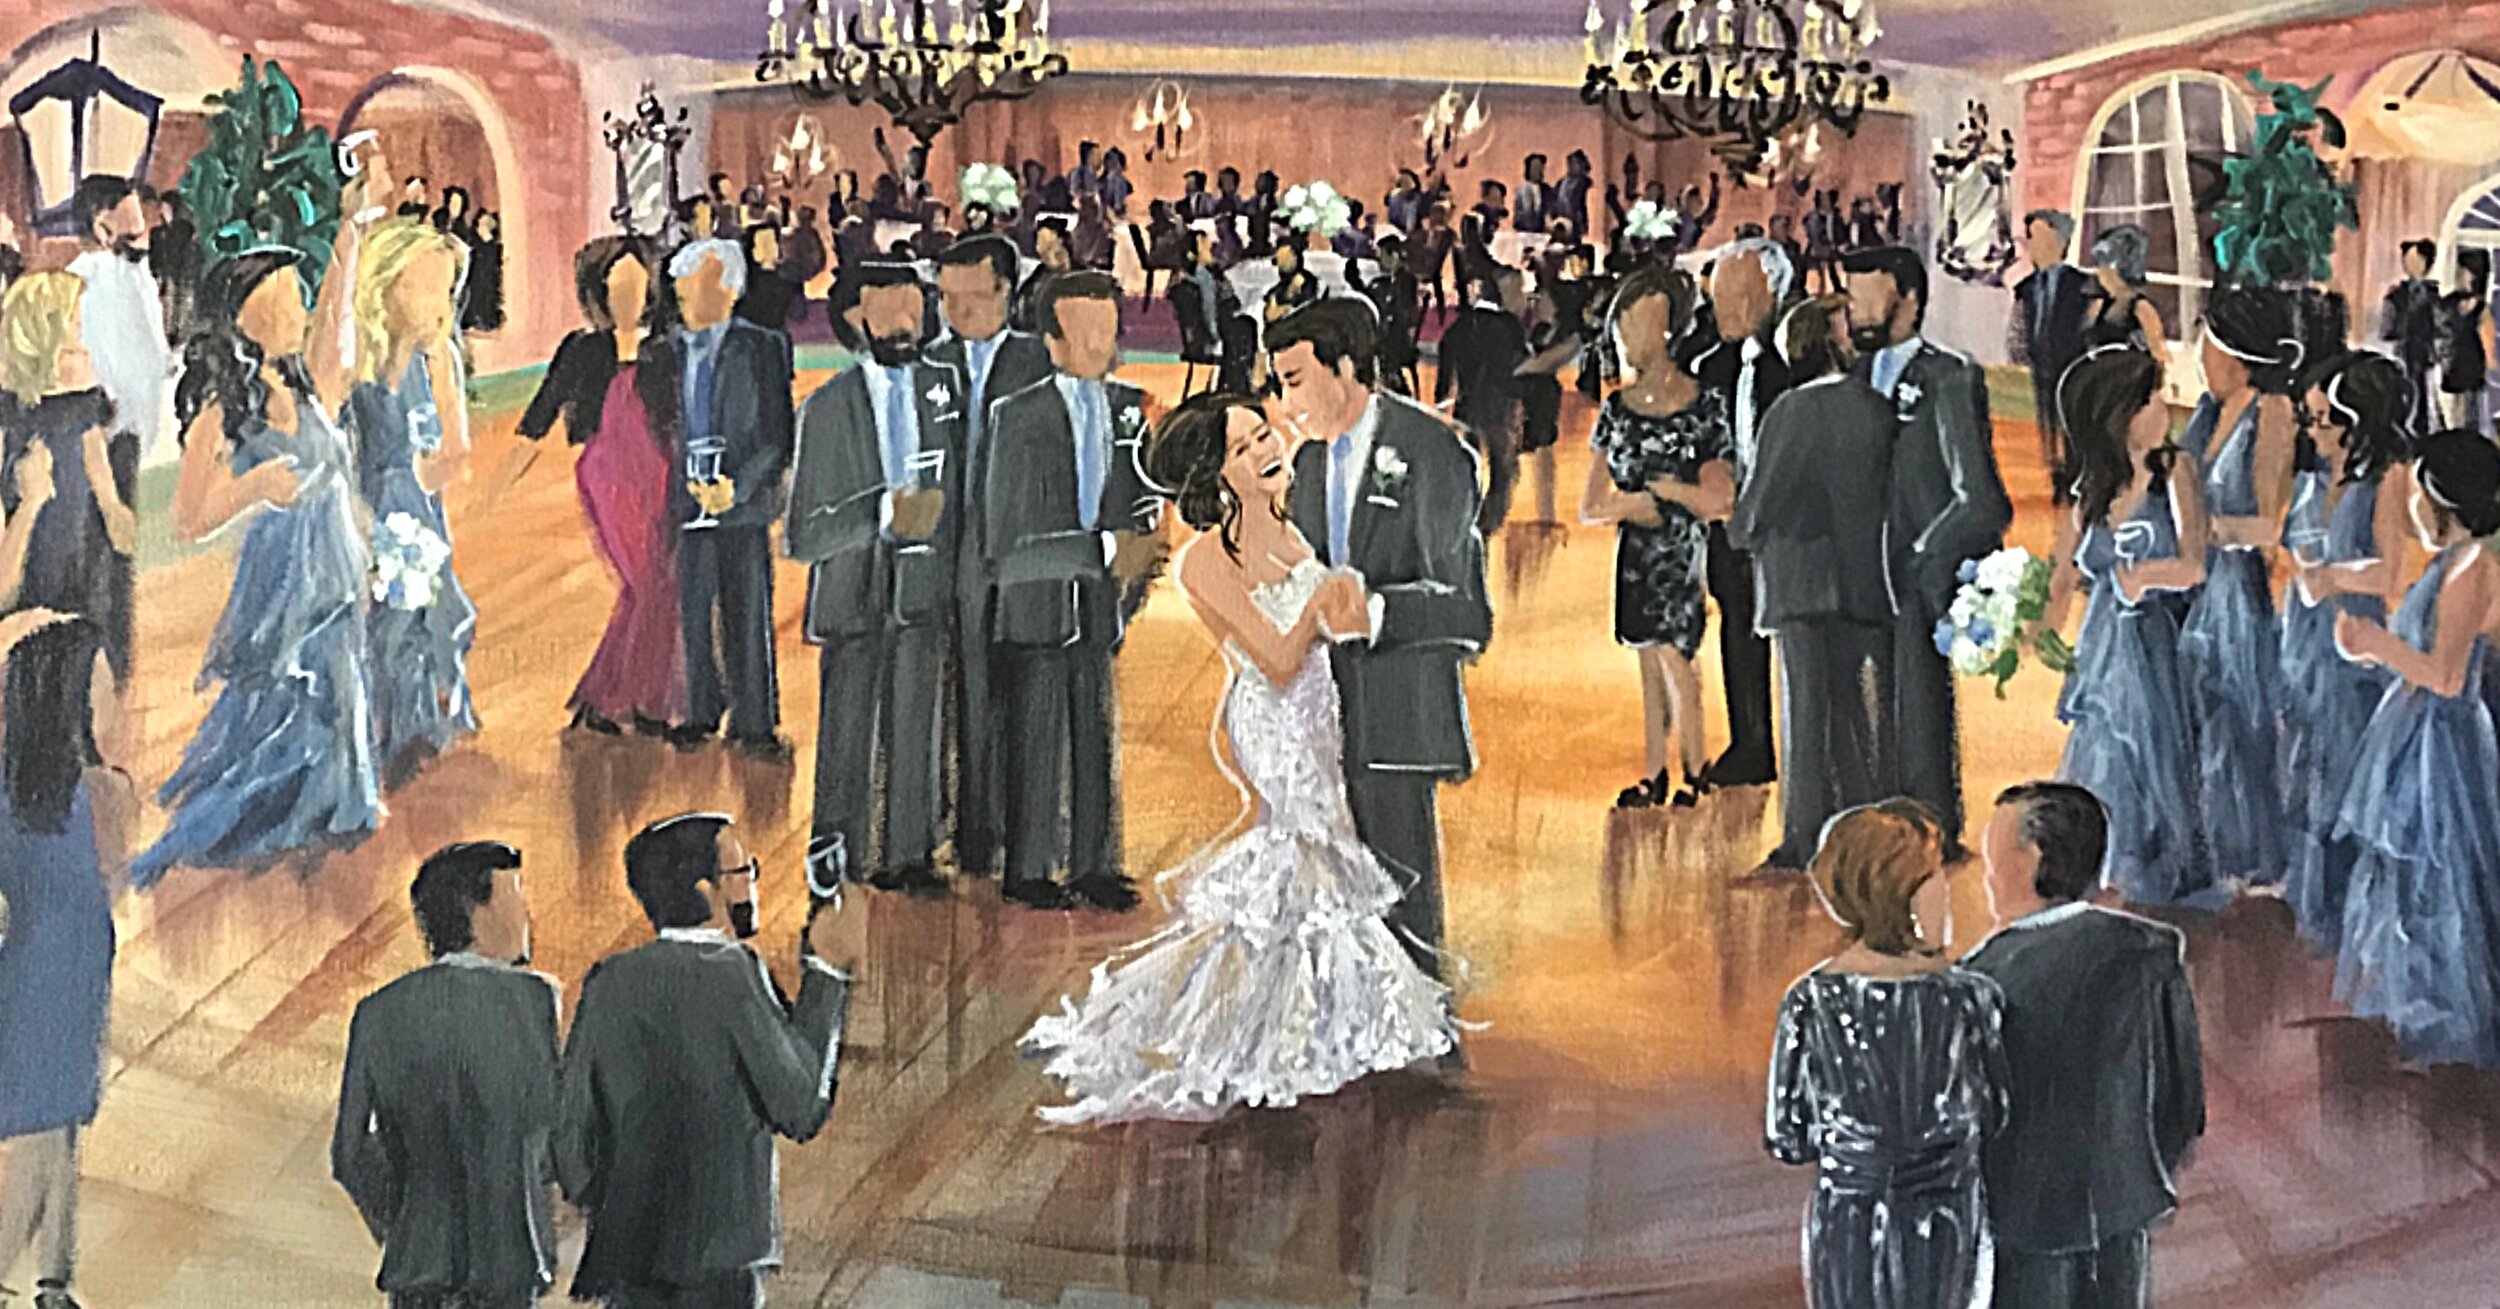 Painted from several photos to best capture the venue, the wedding party and close family, canvas size 24x48